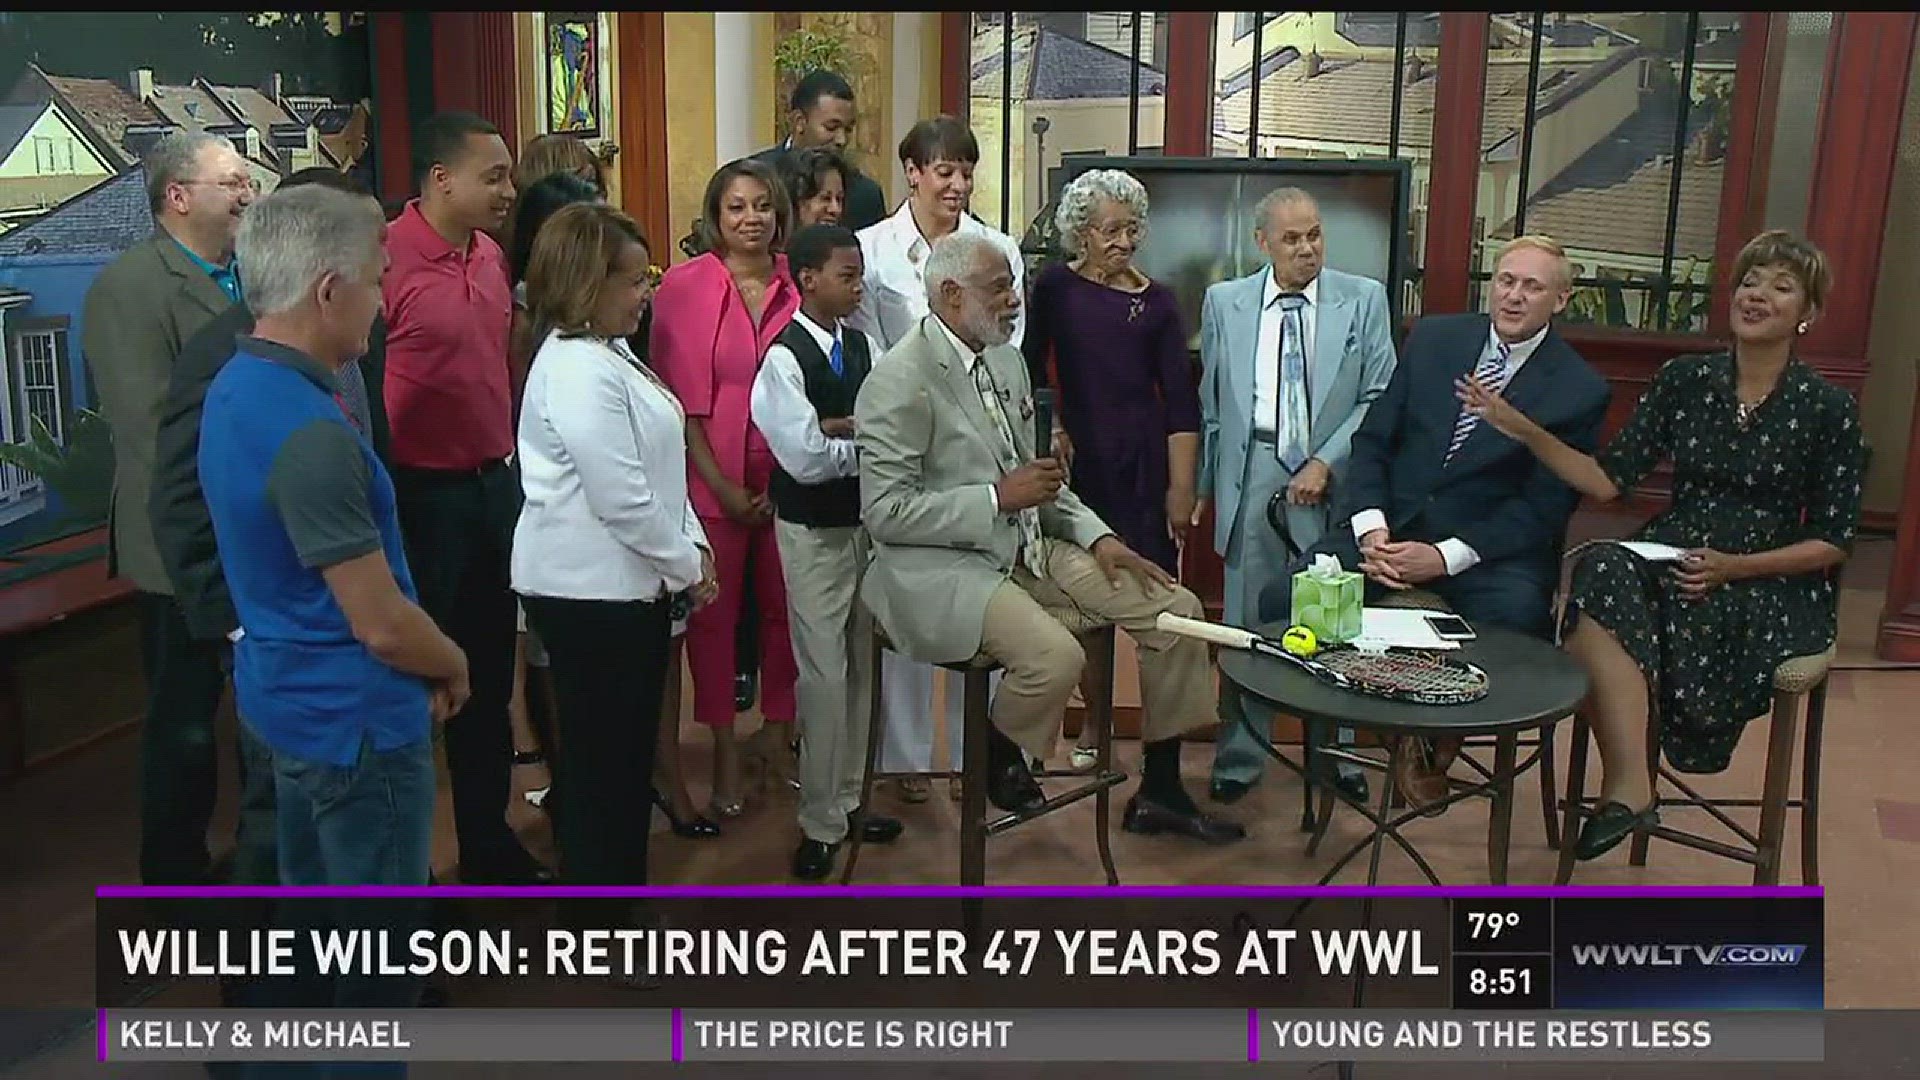 VIDEO: Family, friends congratulate Willie Wilson on retirement